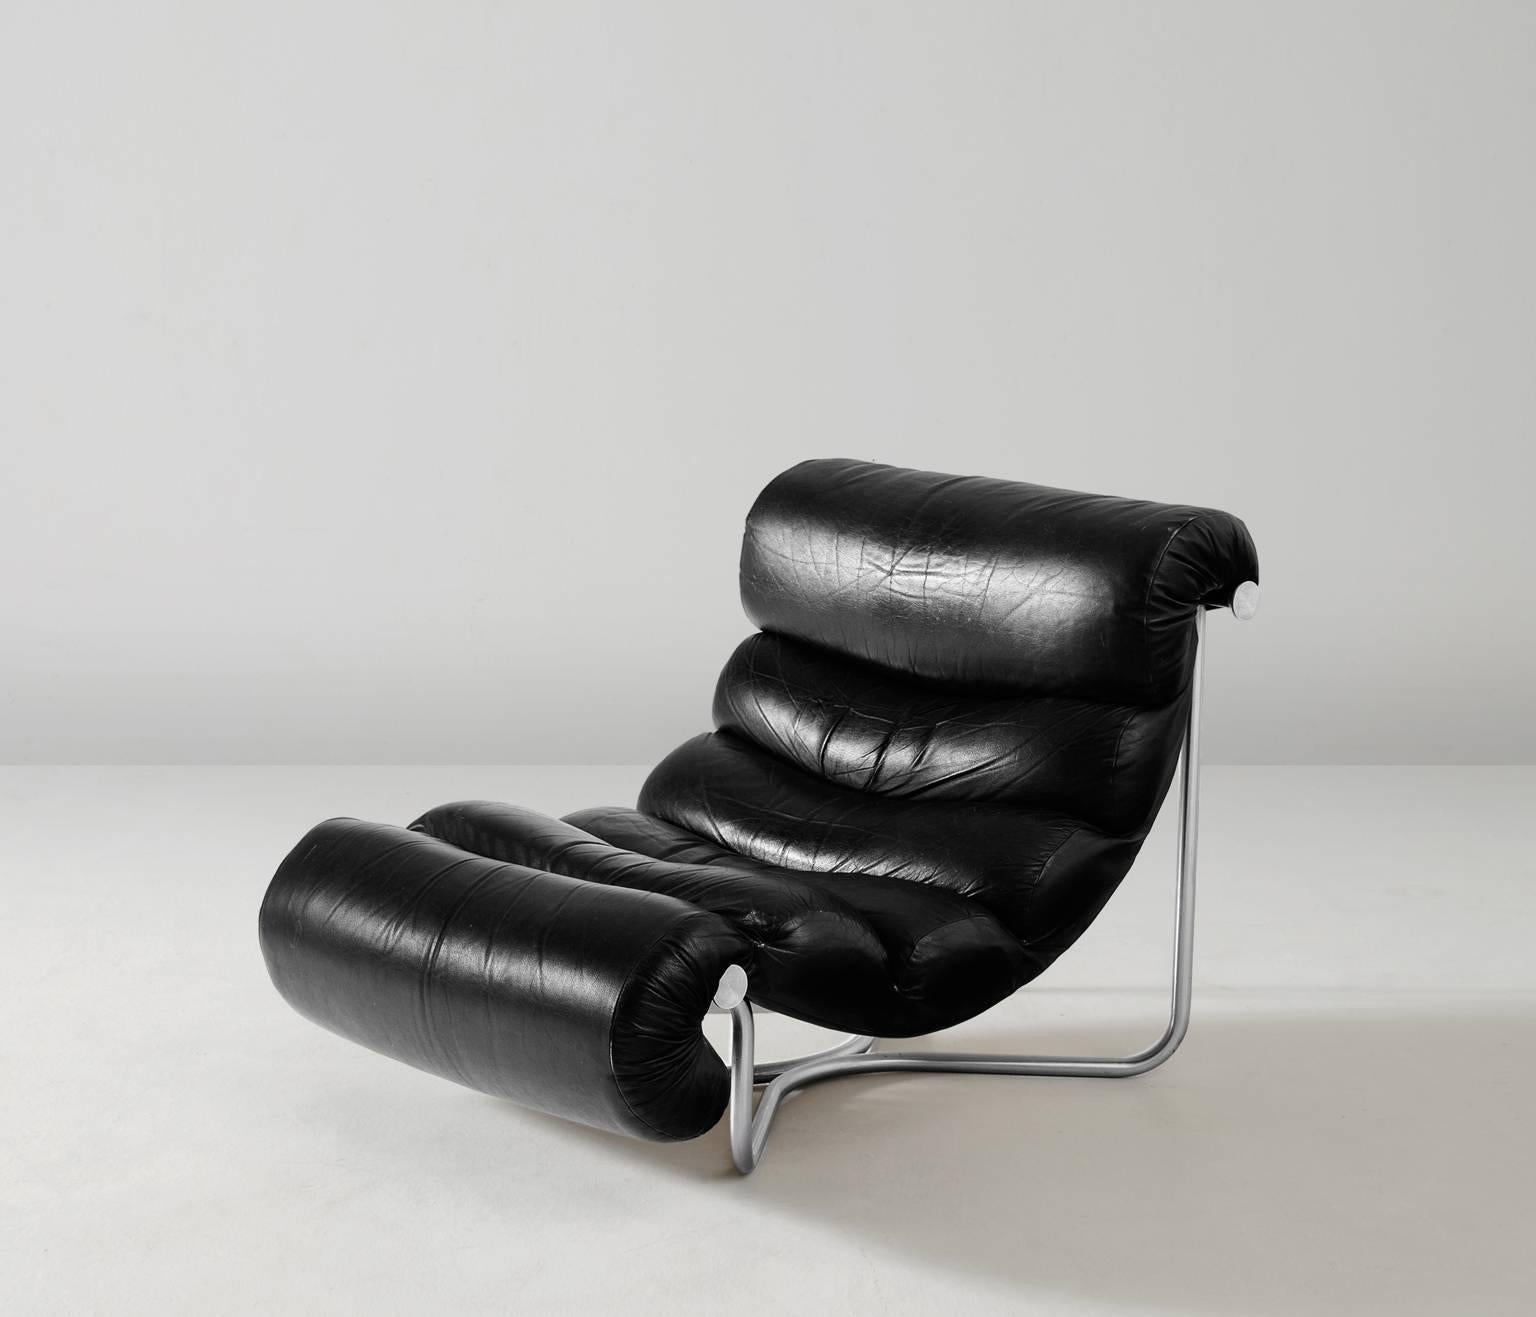 Lounge chair in black leather and chrome, designed by Georges Van Rijck for Beaufort, Belgium 1972

This highly comfortable lounge chair model ‘Glasgow’ is made in black leather with a soft interior. The leather volume shows a segmented surface